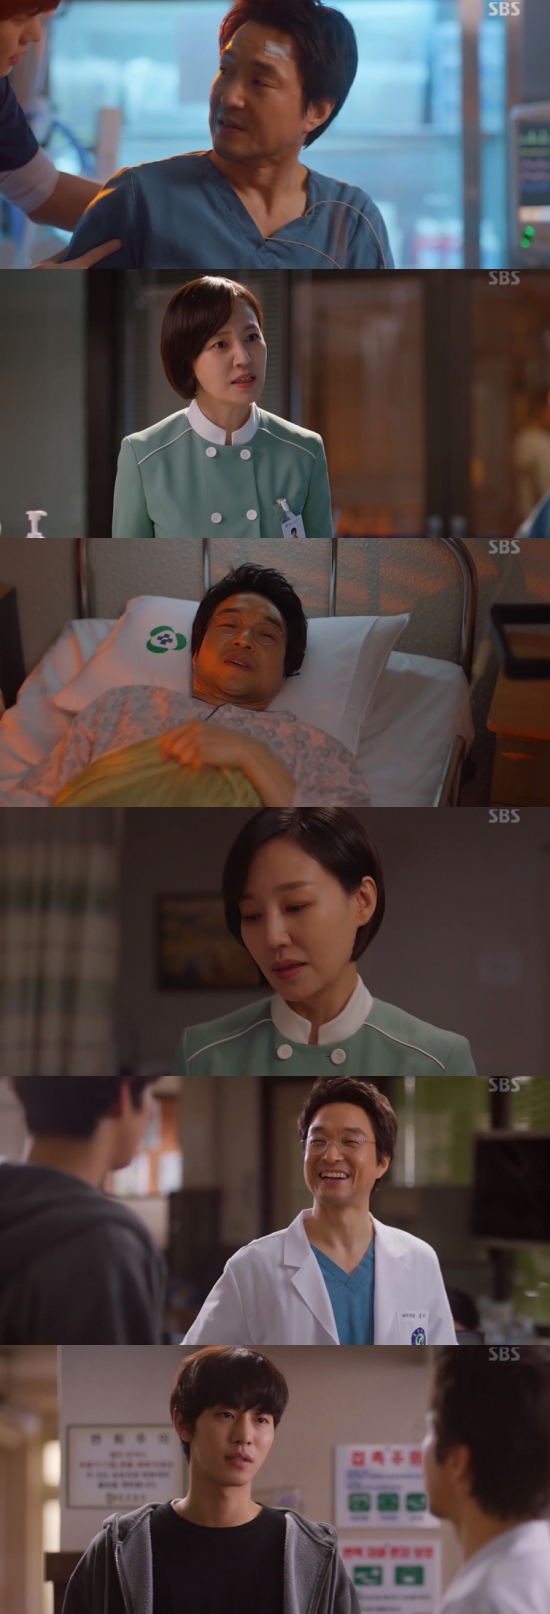 Romantic Doctor Kim Sa-bu 2 Ahn Hyo-seop is at the crossroads of ChoicesIn the 11th episode of SBS monthly drama Romantic Doctor Kim Sabu 2 broadcasted on the 10th, Seo Woo Jin (Ahn Hyo-seop) was drawn to the corner.On that day, Seo Woo Jin and Bae Moon-jung (Shin Dong-wook) found Kim Sa-bu (Han Seok-gyu) who fell to the floor.Seo Woo Jin hastily sealed Kims wounds, and all the hospital staff gathered in one place.Fortunately, Kim regained consciousness and refused to be hospitalized, saying, Its okay, Im not dying. Oh Myung-sim (Jin-kyung) said, Please listen to me. Who is going to die now?Im just going to check on my condition. Why do not you just go to hospital for a day? Kim Sabu reassured me that I do it myself, and Oh Myung-sim said, Do you know that you are lying on the floor of the clinic?If you were hurt, you should have told me. Is there a doctor in this hospital? Look.The doctor will judge whether it is okay or not. Please show an example as a patient. In the end, Kim was treated as he said, and then he found Kims room alone.Oh apologized to Kim Sabu and said, Tuppakki, where Kim Sabu falls, is going to fall down. Do you know? There will be some tests tomorrow morning.The next day, Kim treated the patients as usual. Seo Woo Jin dissuaded Kim Sabu, saying, Because there are people here who need teachers, because they should not be sick.Thats why you keep hiding it. Im afraid people here are worried. Im not sure thats a good Tuppakki for you.I do not know if Tuppakki is a good relationship that everyone depends entirely on one teacher.I am so sick that I can not hide my sickness to meet that expectation. Kim said, Thats what Im saying in the jargon, and Seo Woo Jin said, Please be diagnosed and get treated.At this time, Park Eun-tak (Kim Min-jae) heard the conversation between Kim Sa-bu and Seo Woo Jin, who worried about Oh Myung-sim, saying, Is Kim Sa-bu burdened by them?In addition, Seo Woo Jin noticed that the doctor who had performed the surgery in the past had made a mistake while he was operating.Seo Woo Jin decided to reveal this, and he had a nervous battle with Park Min-guk (Kim Joo-heon).In the end, Park Min-guk raised the tension of the drama by revealing that the doctor who made a mistake to Seo Woo Jin was Cha Eun-jae.Photo = SBS Broadcasting Screen